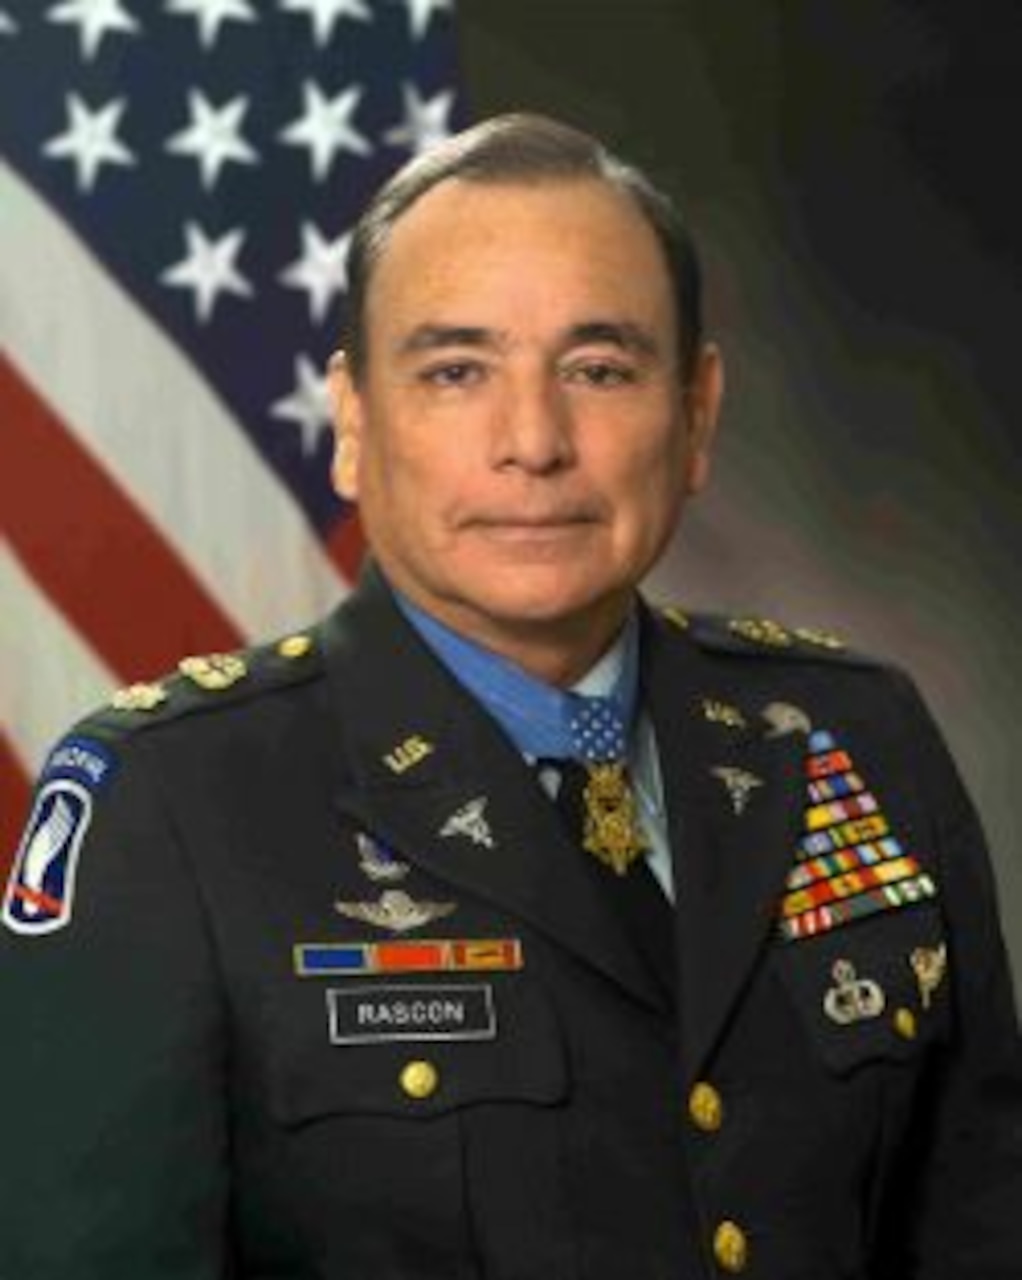 A man in a military uniform wears a Medal of Honor.